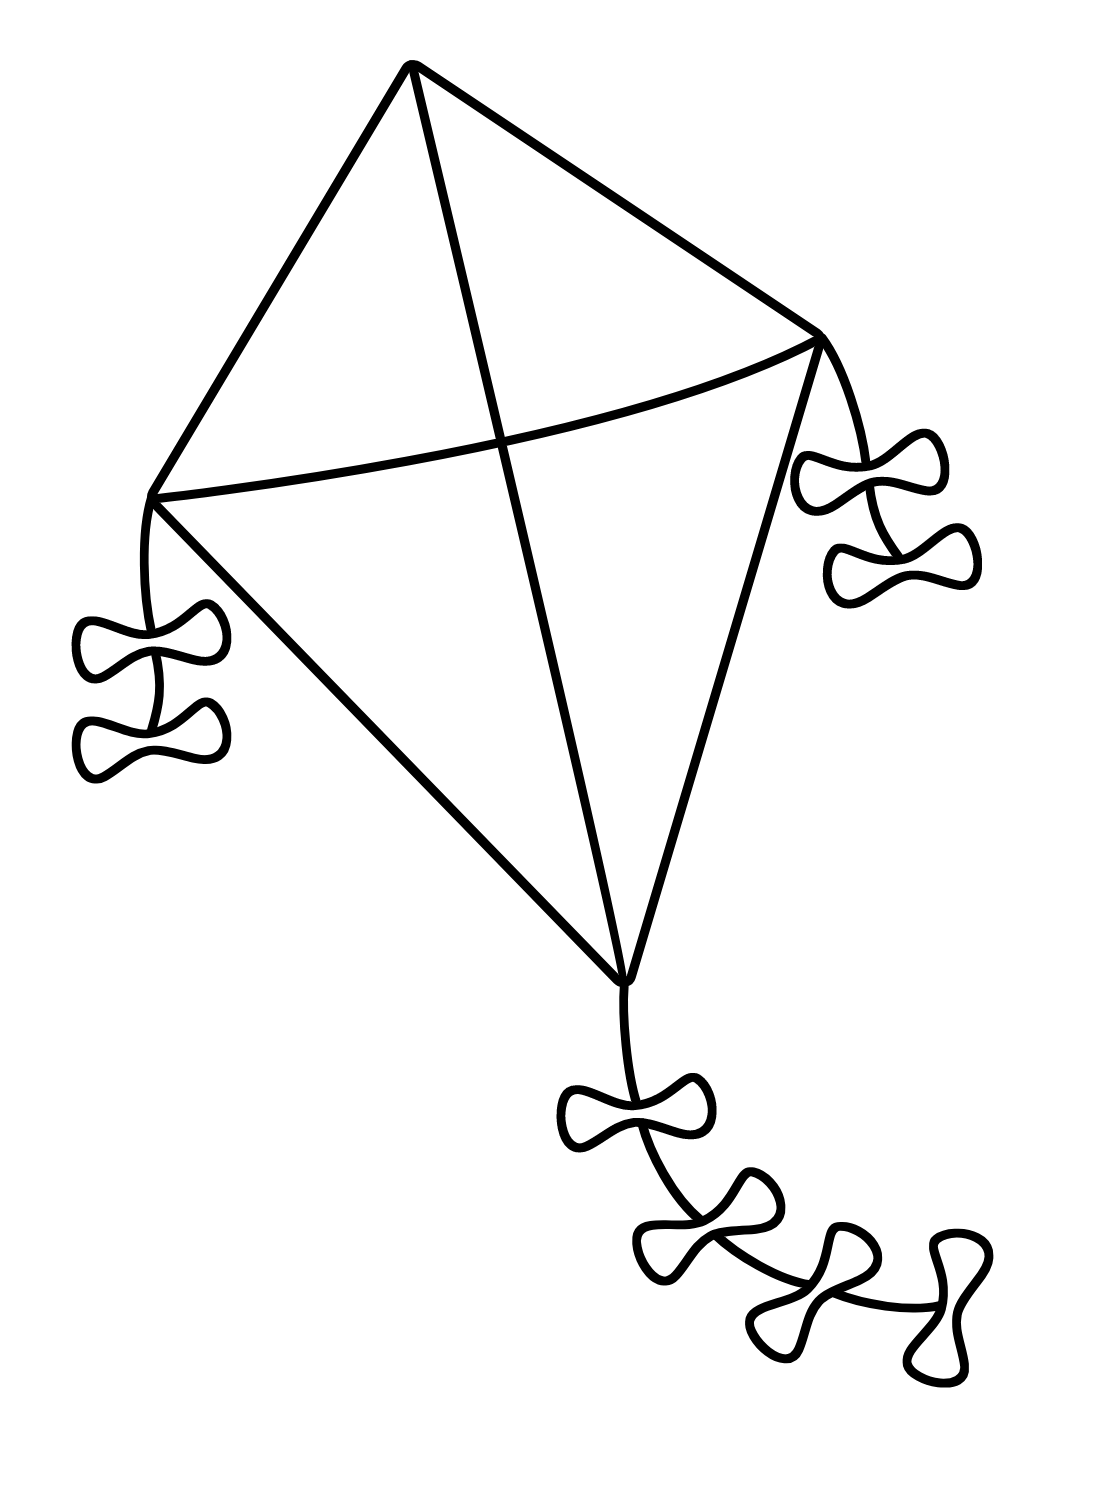 Kite for Kids Coloring Page